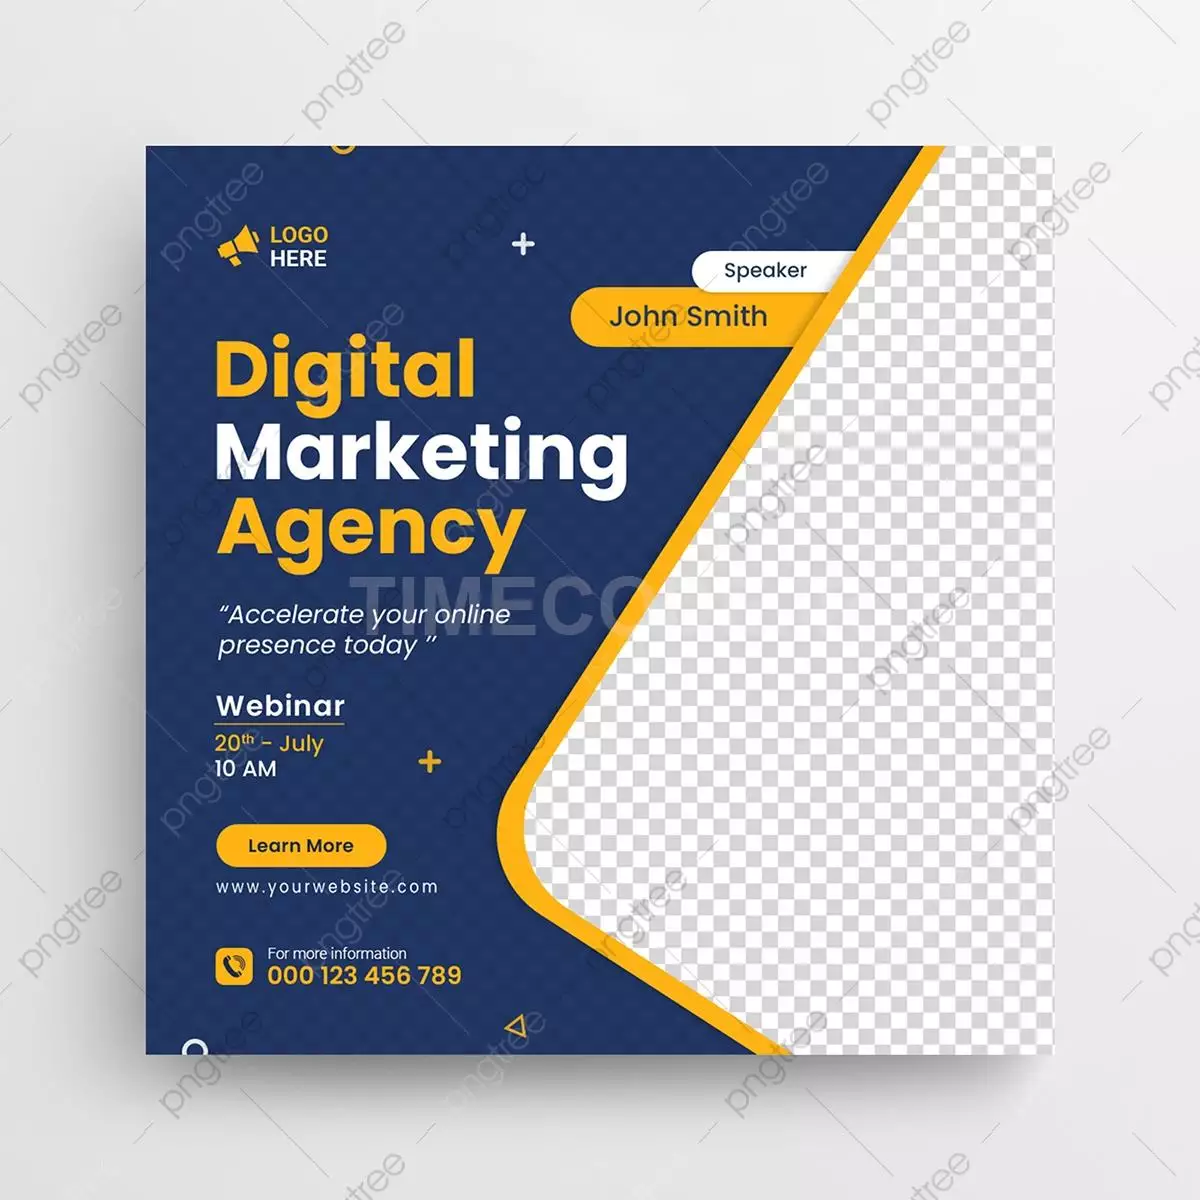 Digital Marketing Agency And Corporate Social Media Post Instagram Banner Template Template Download on Pngtree